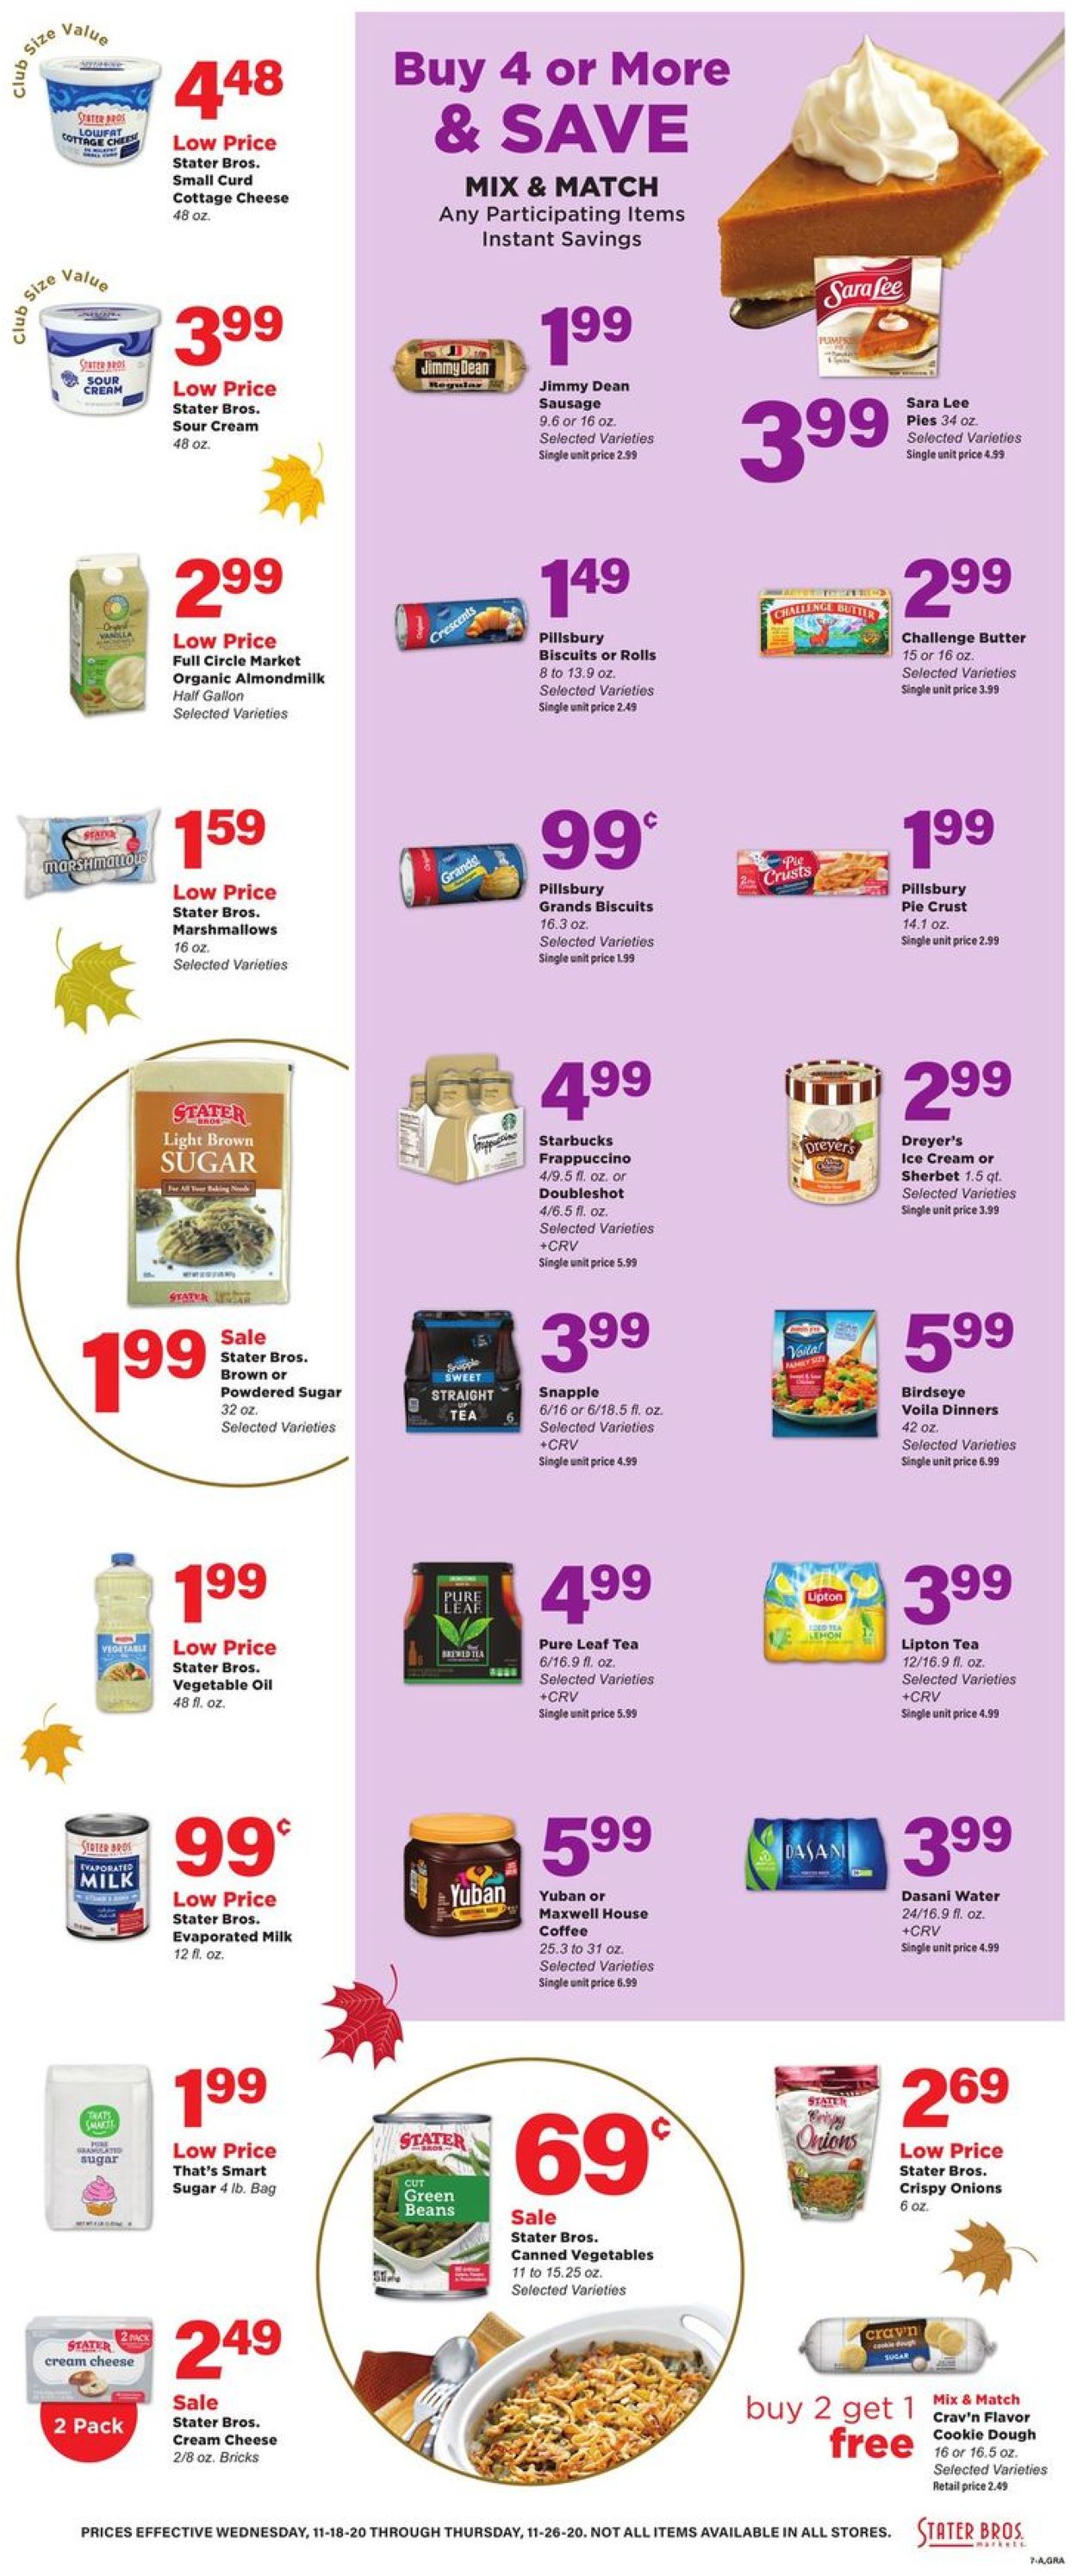 Stater Bros. Thanksgiving ad 2020 Weekly Ad Circular - valid 11/18-11/26/2020 (Page 7)